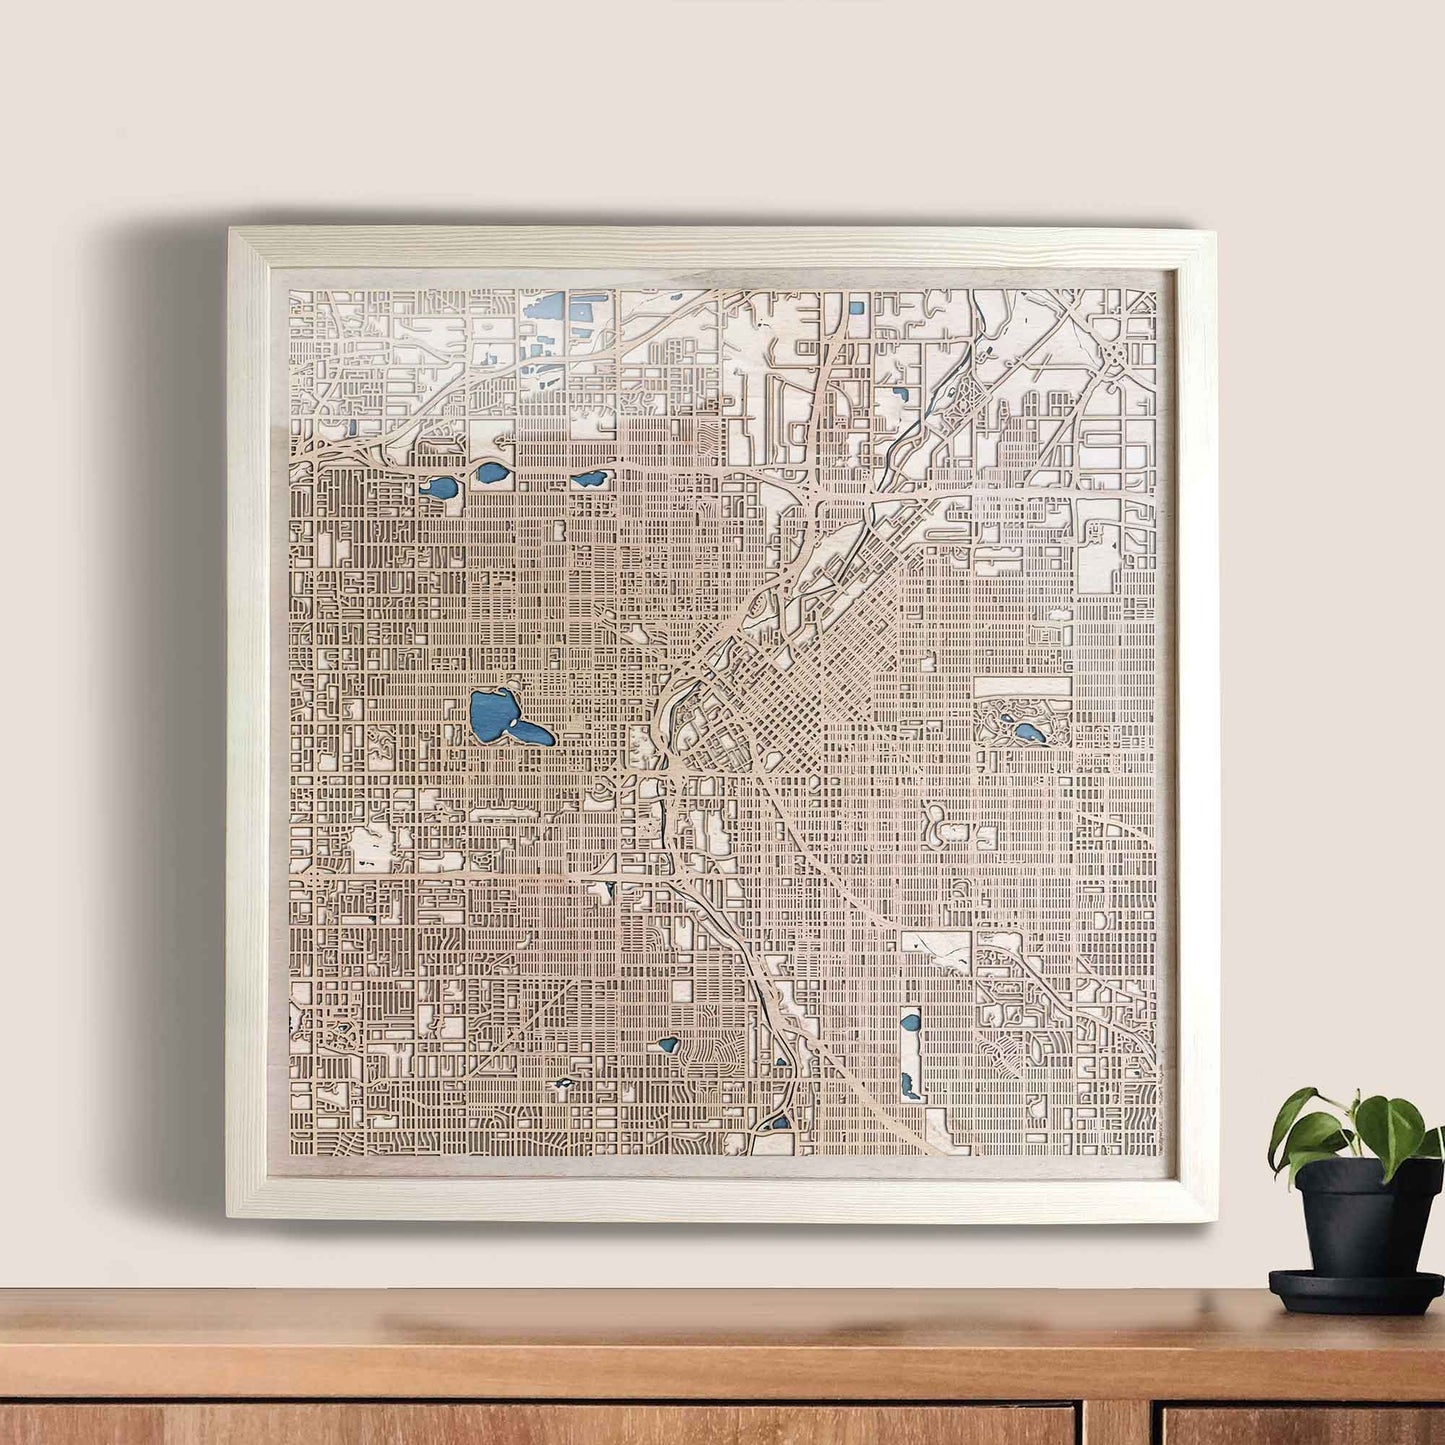 Denver Wooden Map by CityWood - Custom Wood Map Art - Unique Laser Cut Engraved - Anniversary Gift